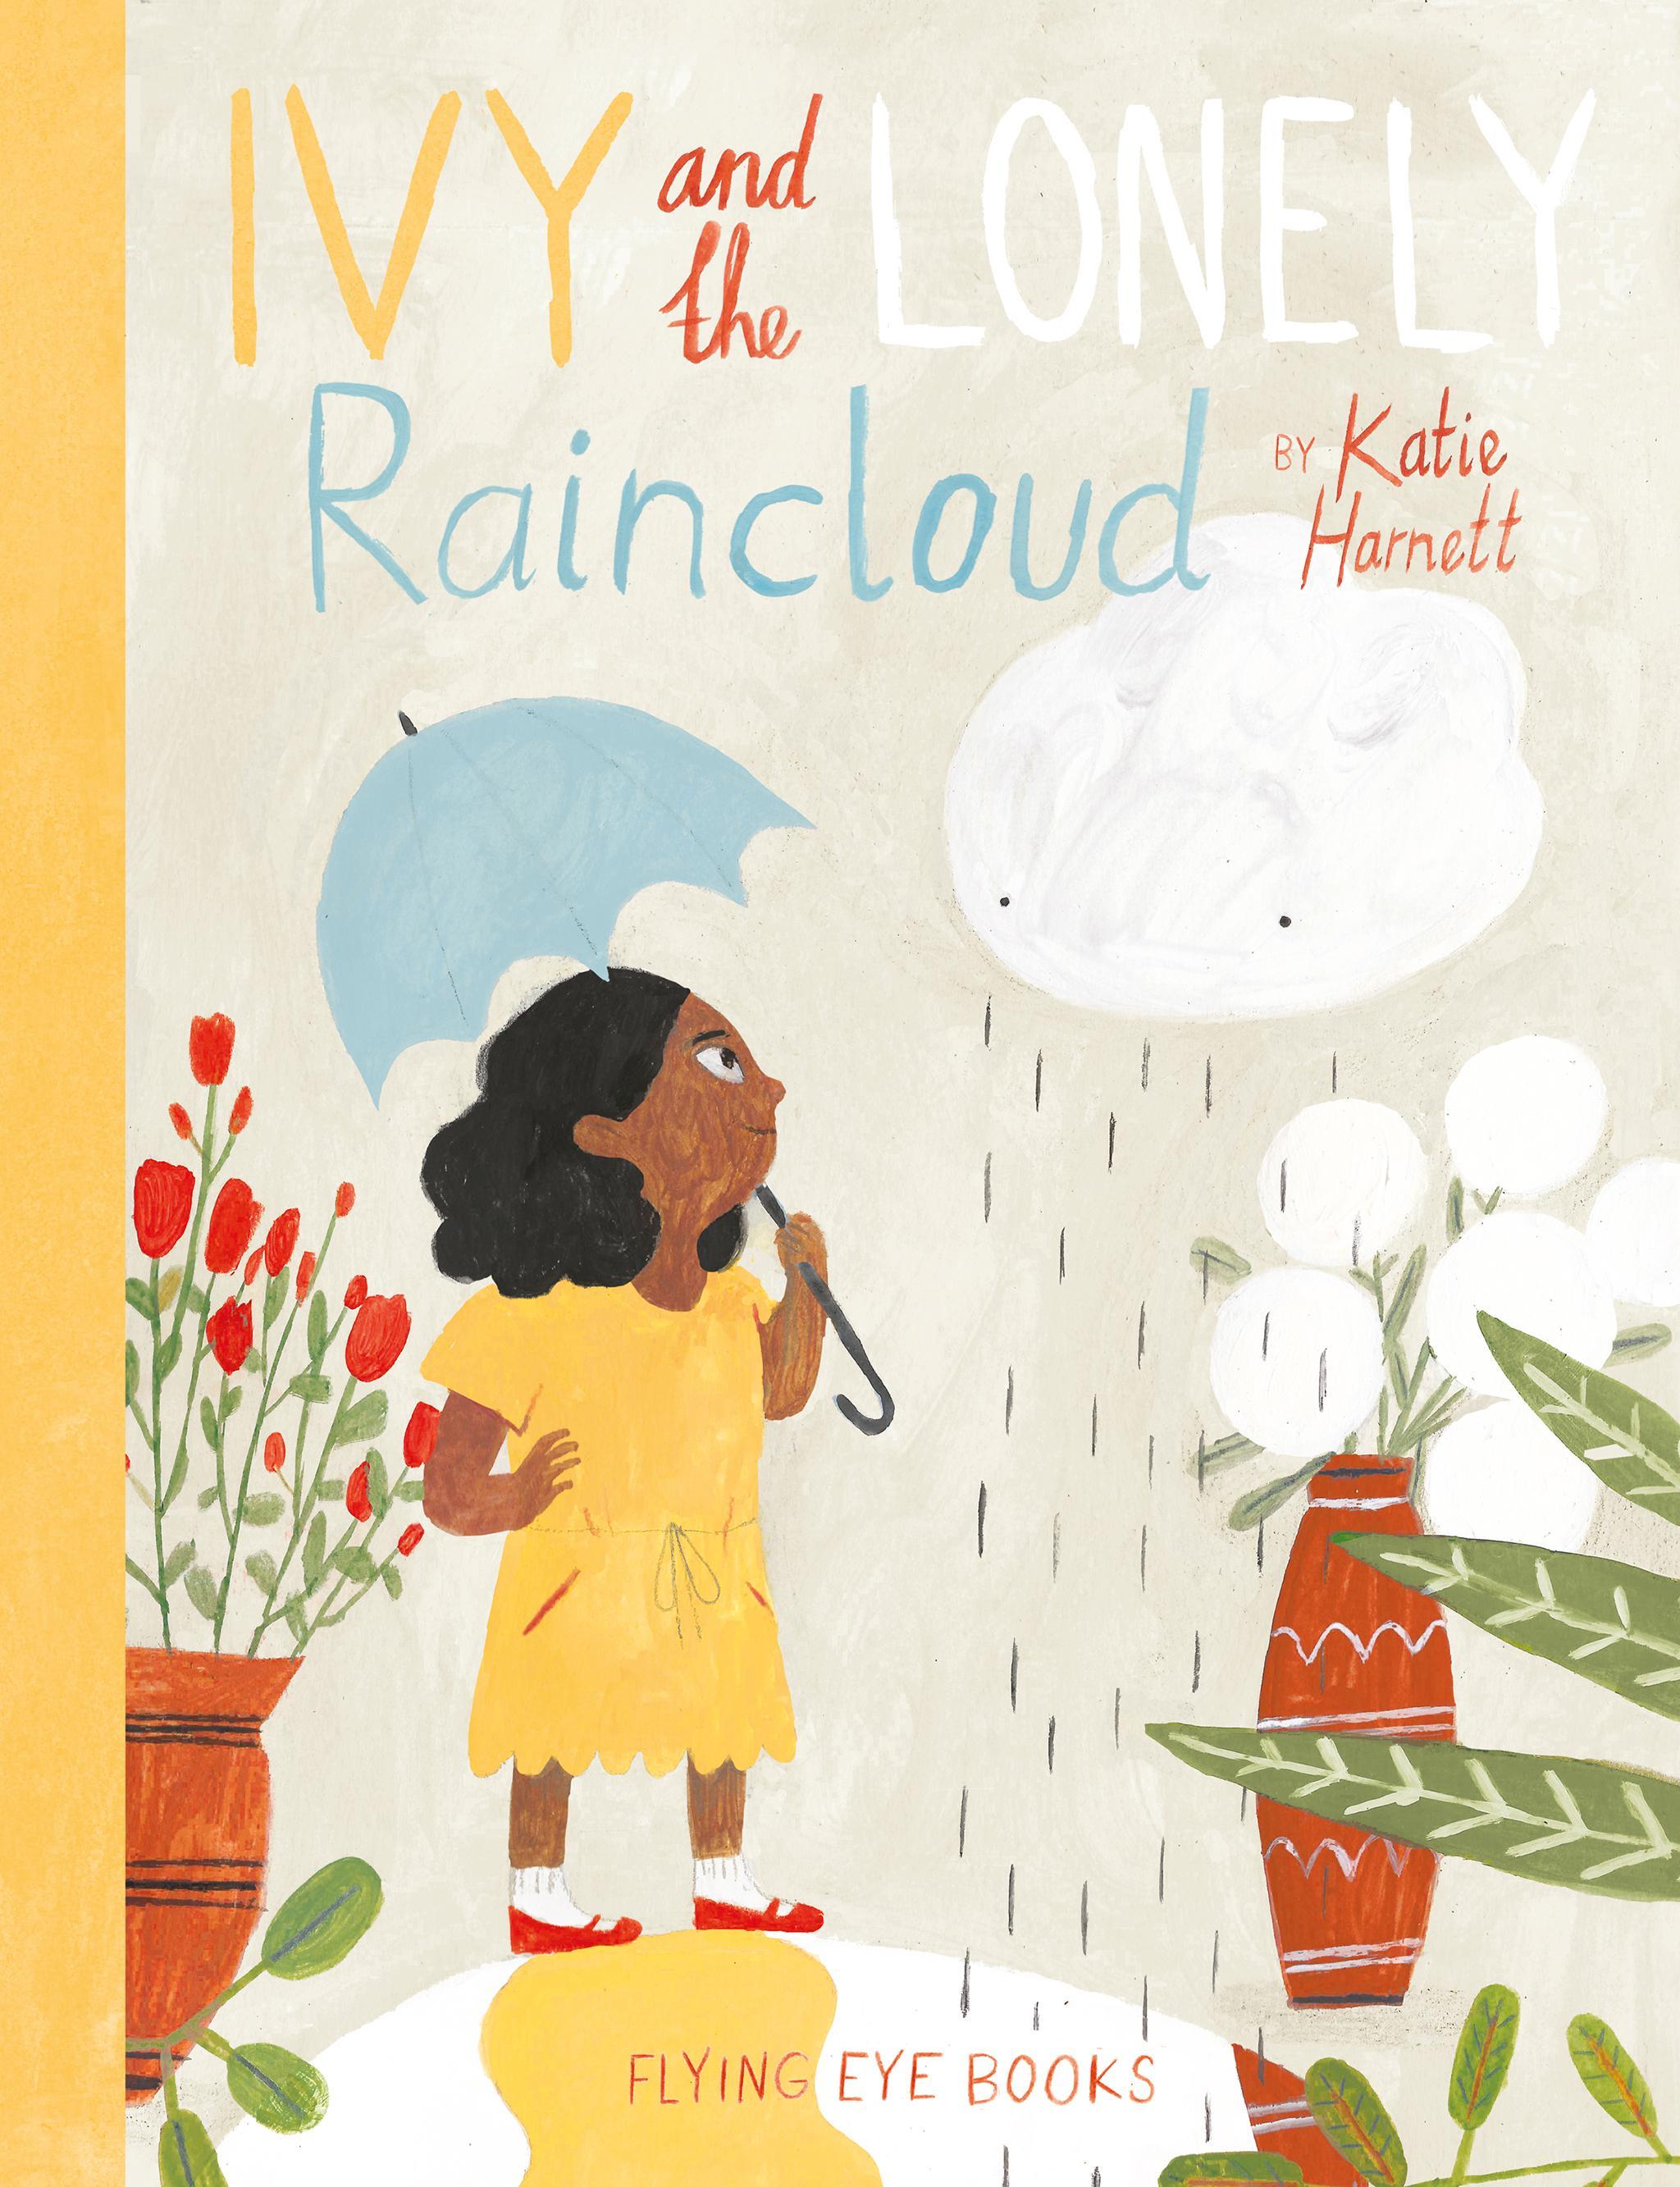 Ivy and The Lonely Raincloud - Katie Harnett